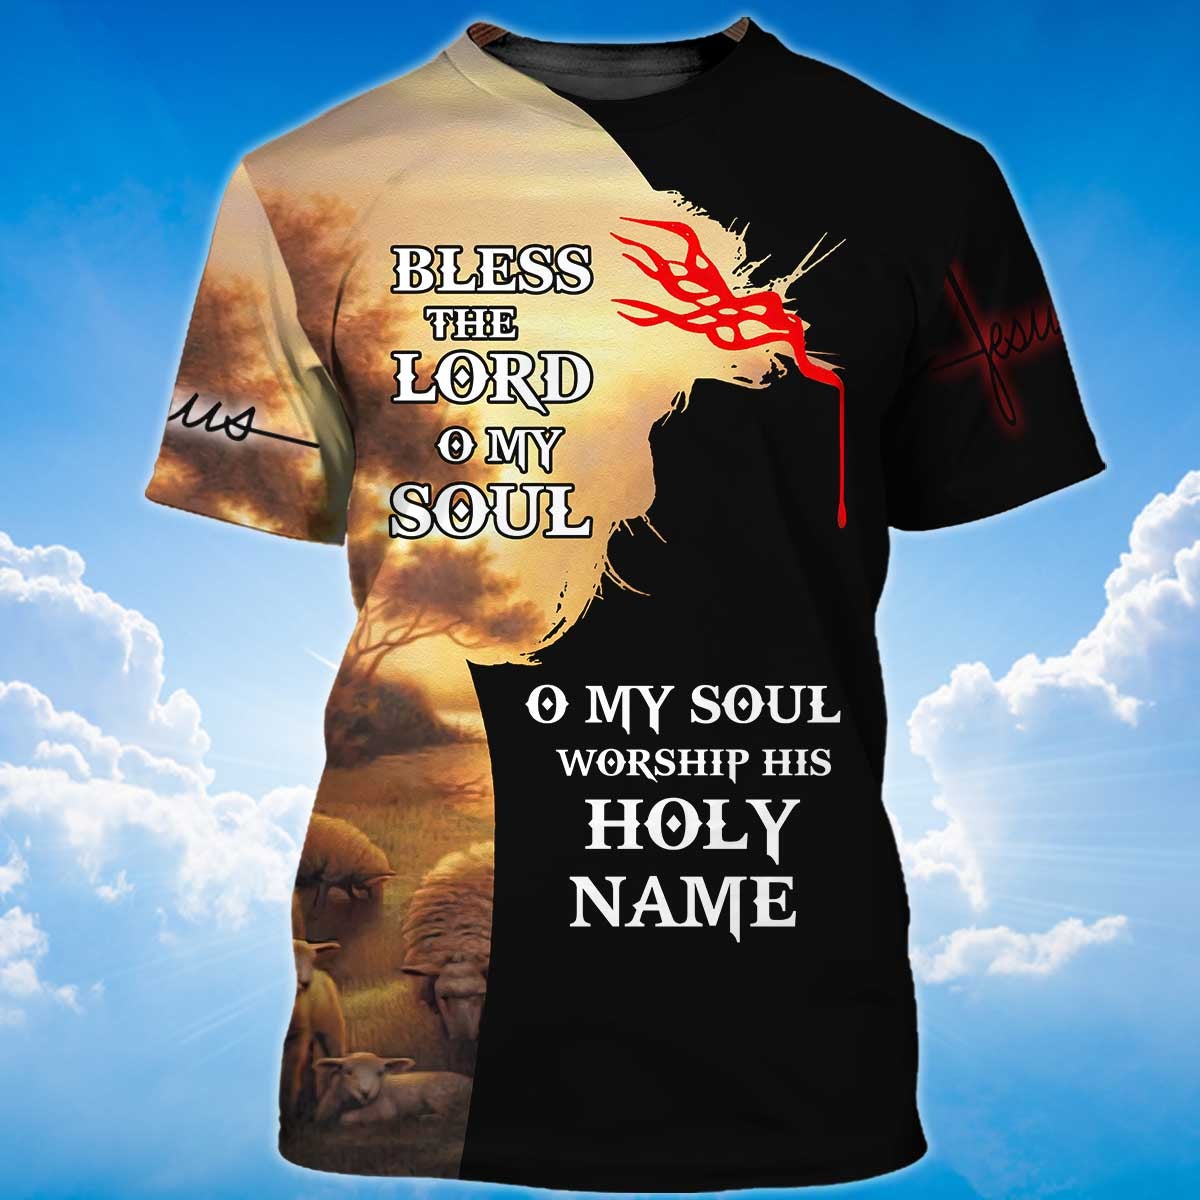 Bless The Lord O My Sould T Shirt Jesus Shirt For Men Women